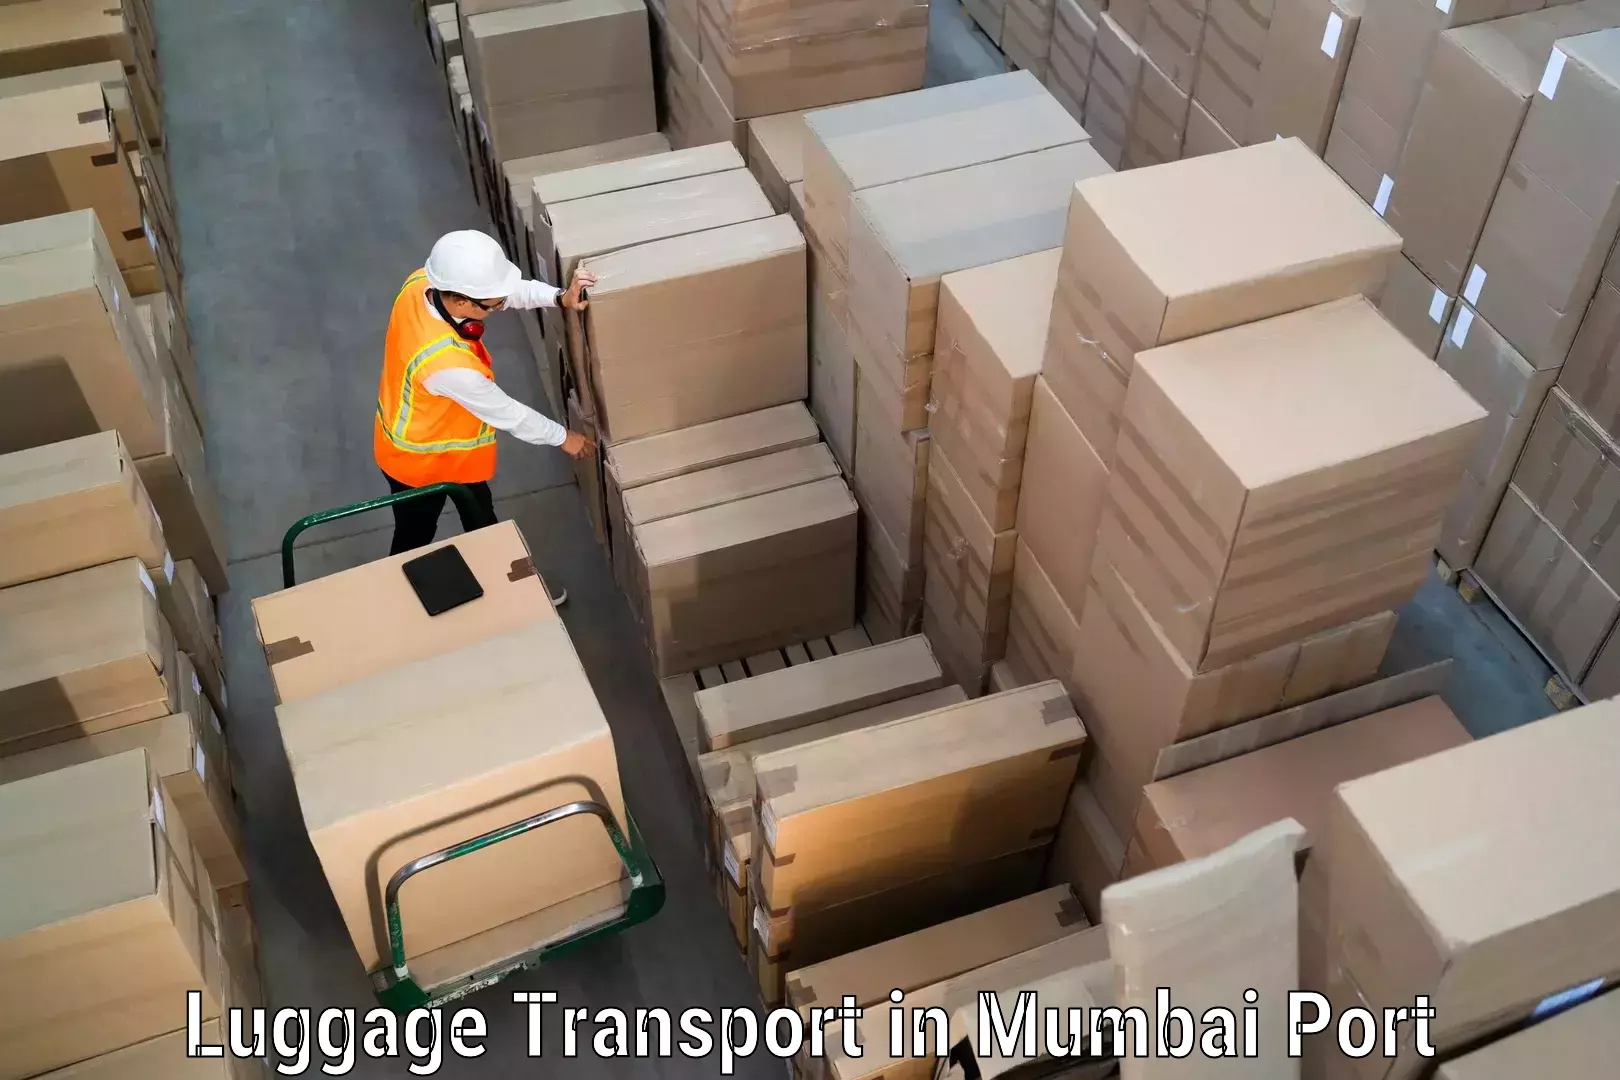 Personal luggage delivery in Mumbai Port